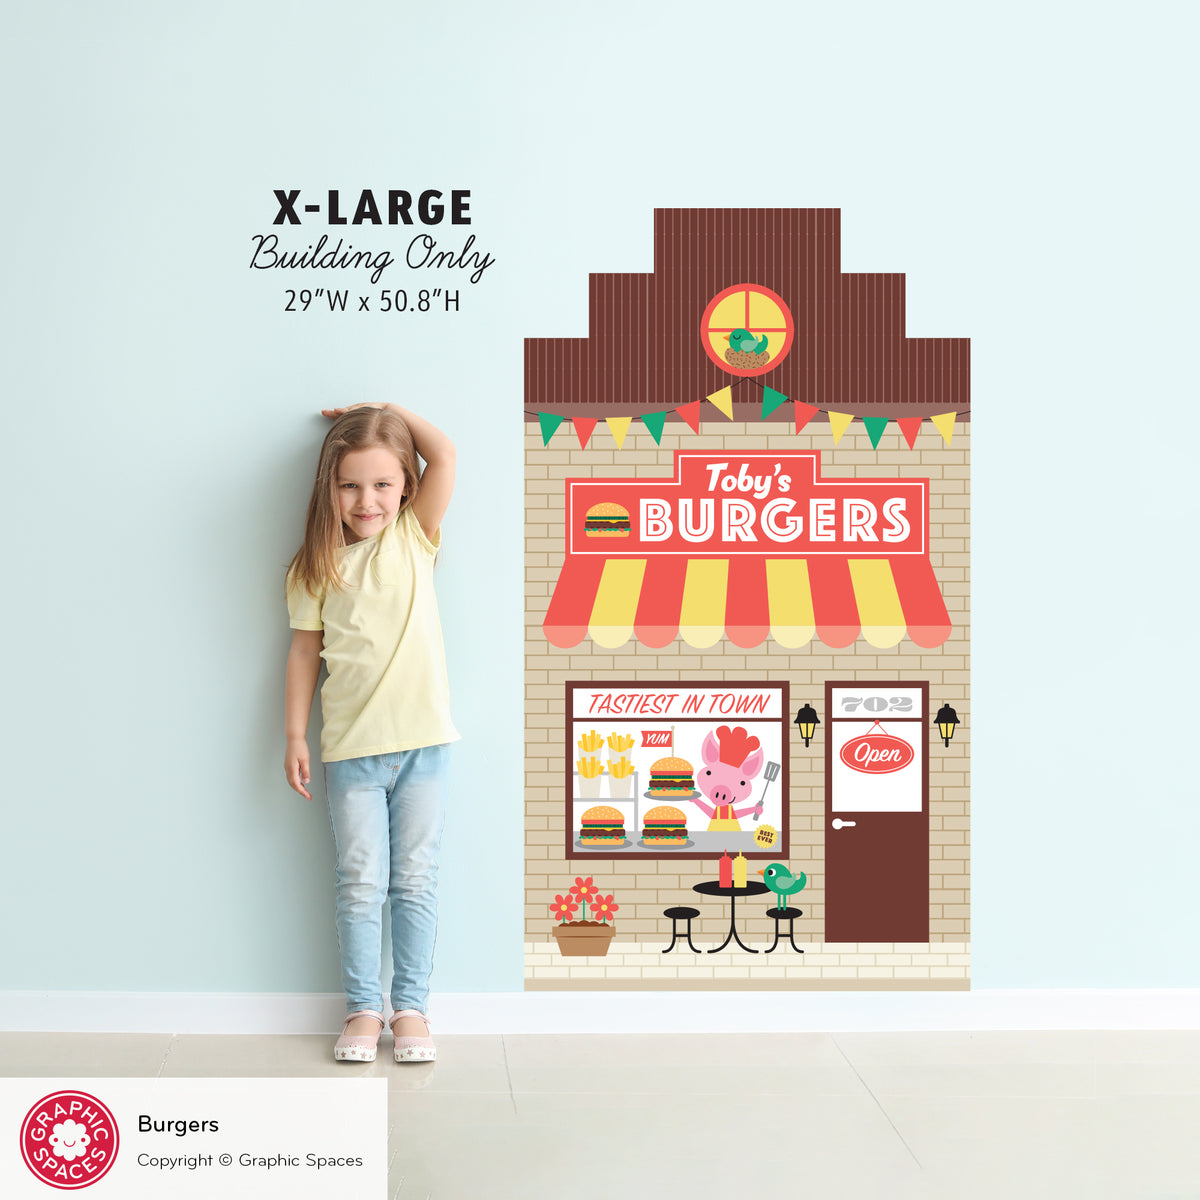 Burger Shop Fabric Wall Decal - Happy Town